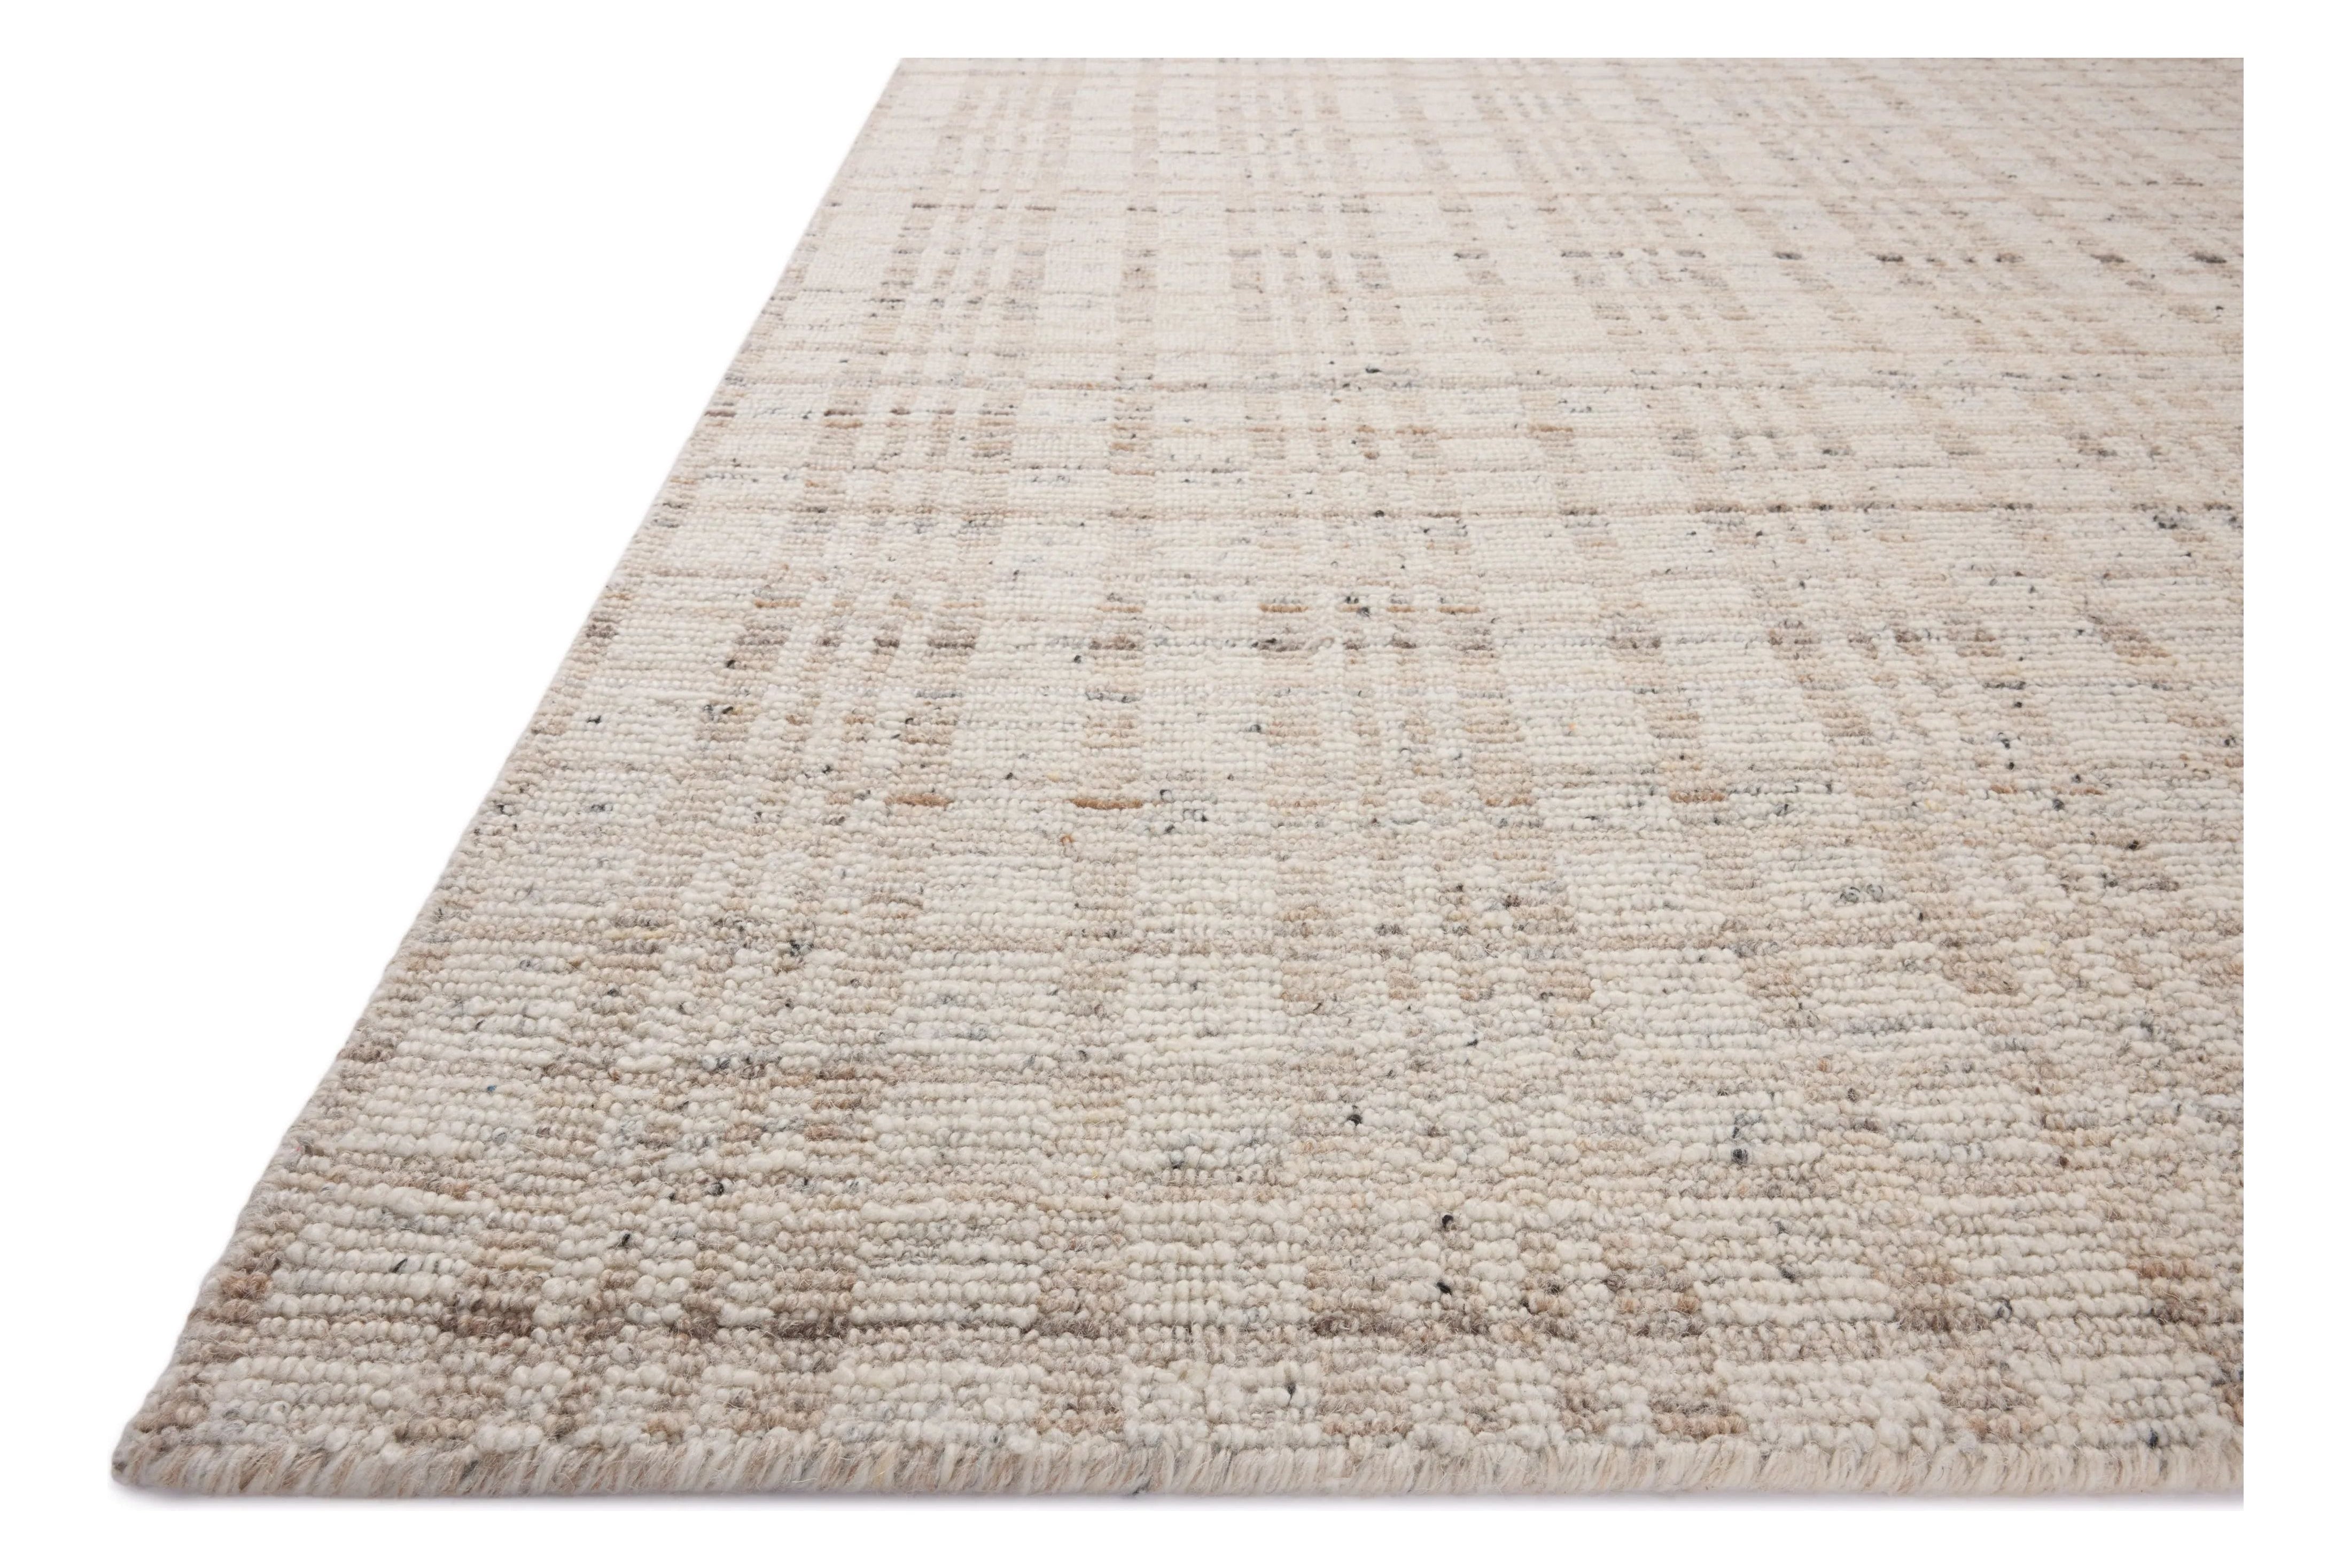 The Sonya Ivory / Natural Rug is a hand-loomed area rug with a light, airy palette and understated graphic design. The rug’s textural pile is a soft blend of wool and nylon that creates dimension in living rooms, bedrooms, and more. Amethyst Home provides interior design, new home construction design consulting, vintage area rugs, and lighting in the San Diego metro area.